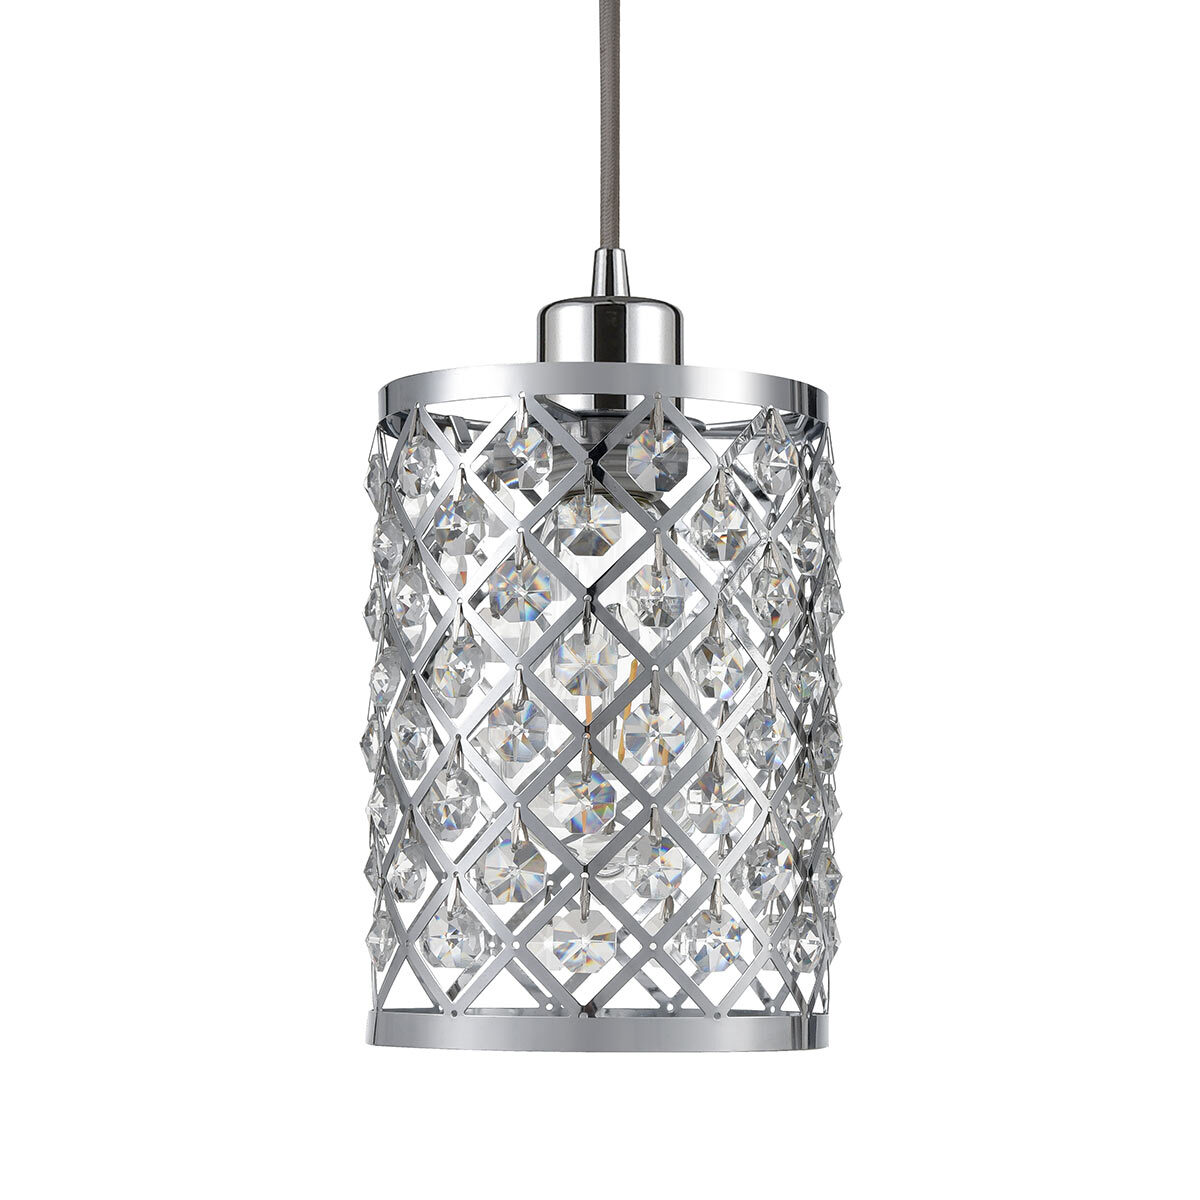 Close up Image of Gisele Crystal 3 Arm Floor Lamp Shade, Light off